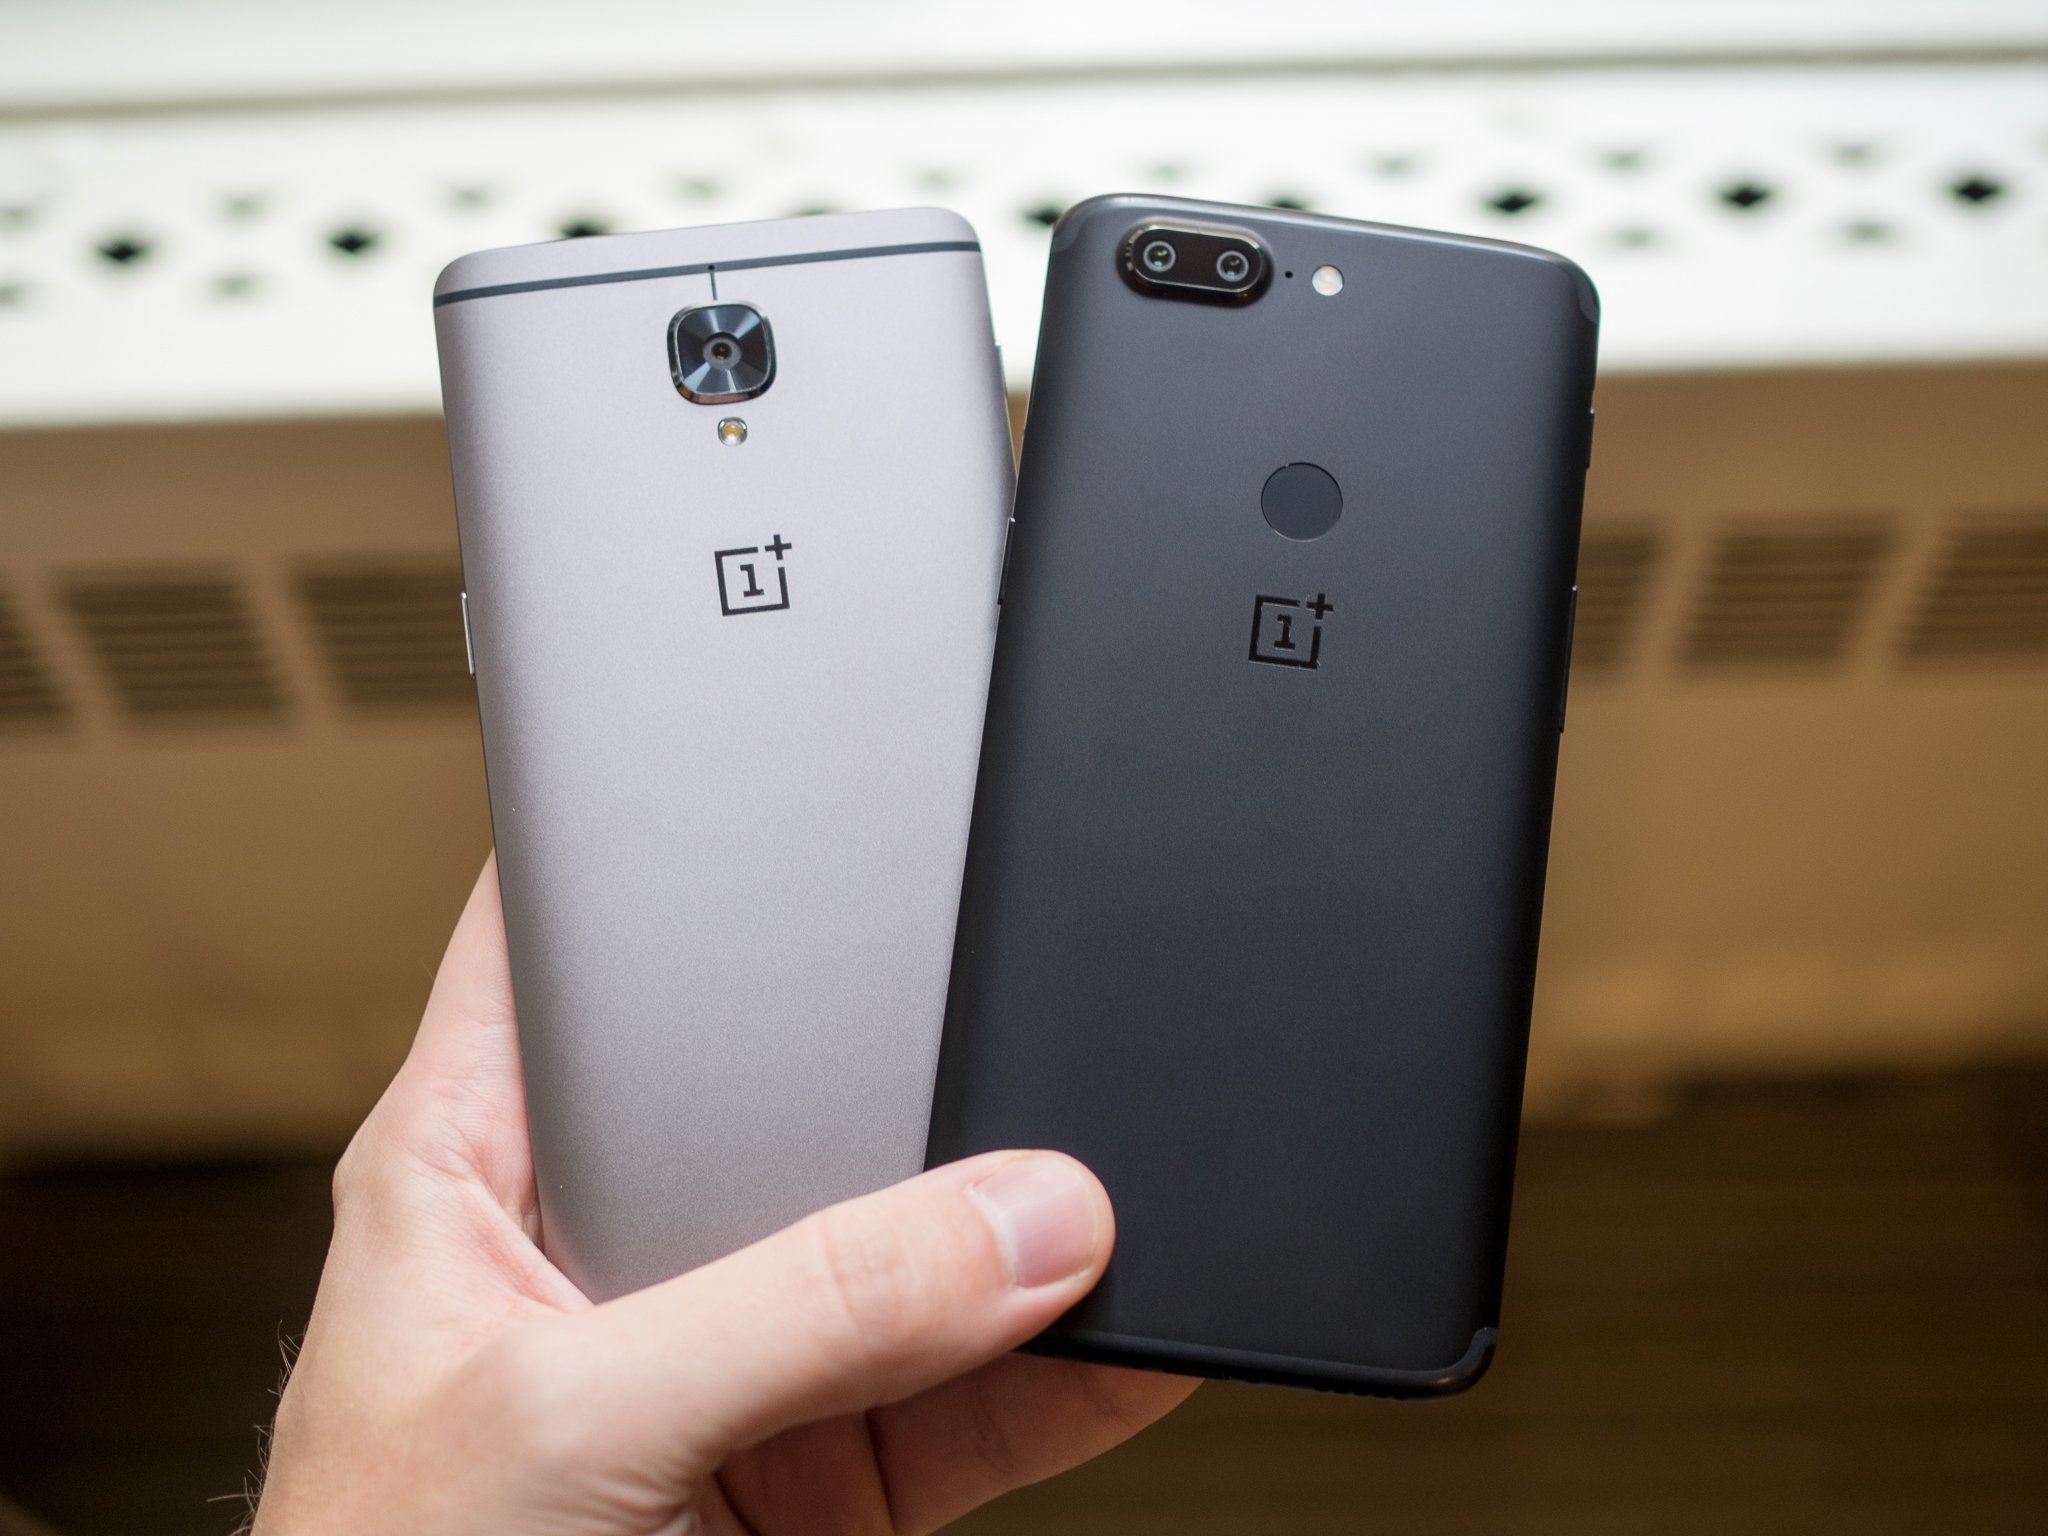 Compare oneplus 3 and oneplus 5t